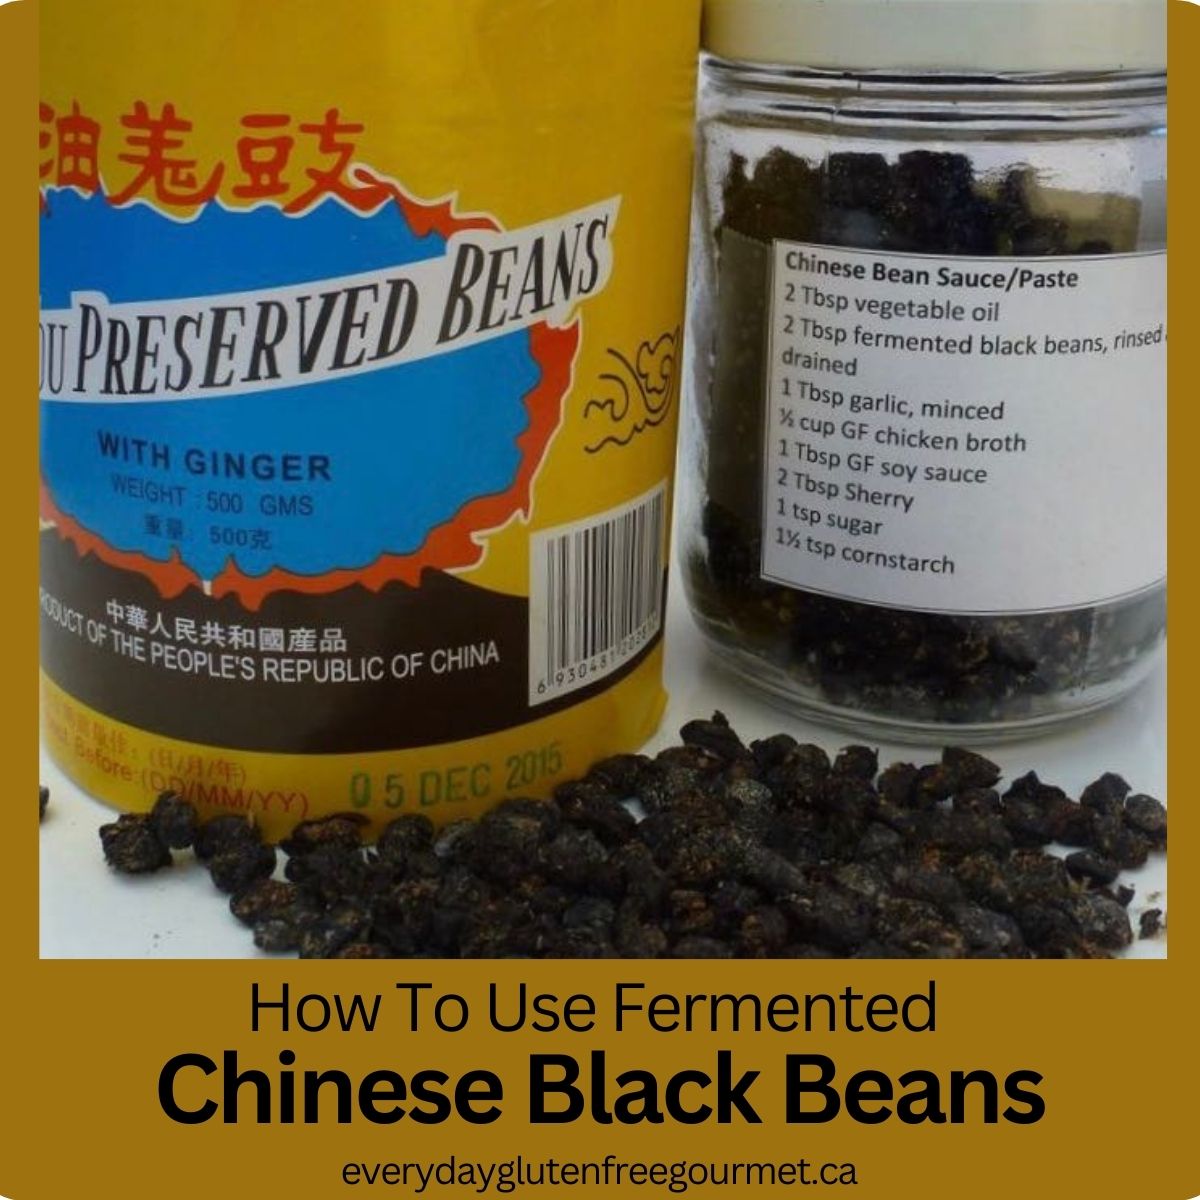 A yellow box of Preserved Chinese Black Beans beside the jar they are be stored in. Attached to the jar is a recipe for Chinese Black Bean Sauce.